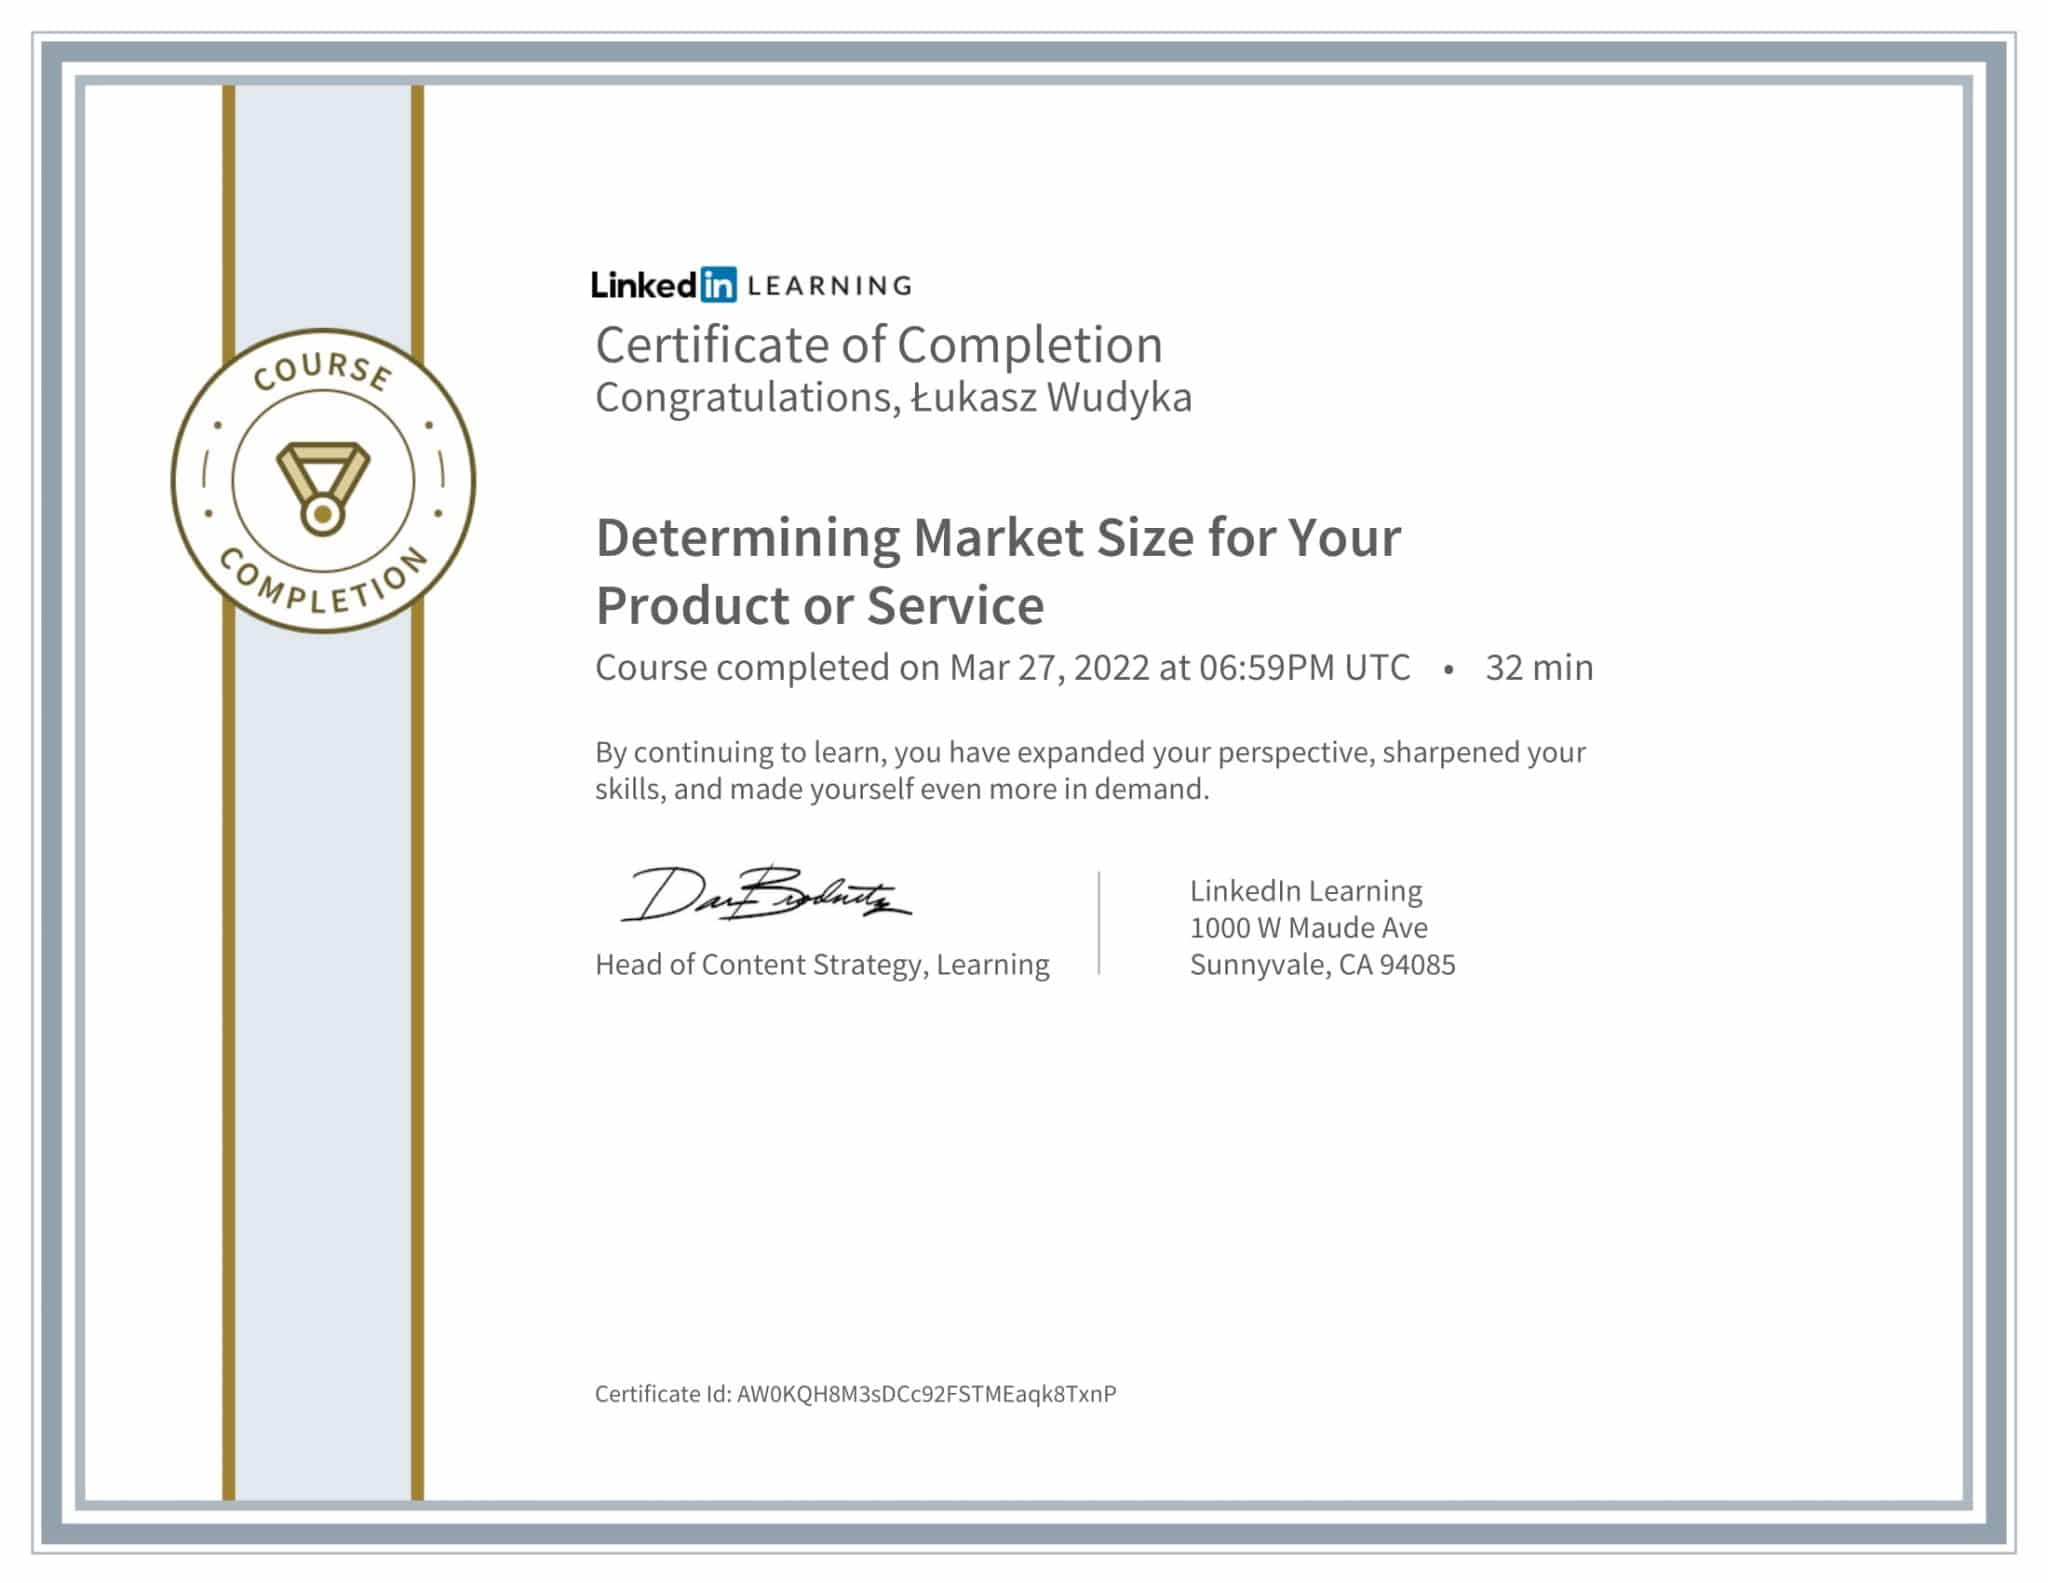 CertificateOfCompletion_Determining Market Size for Your Product or Service-1